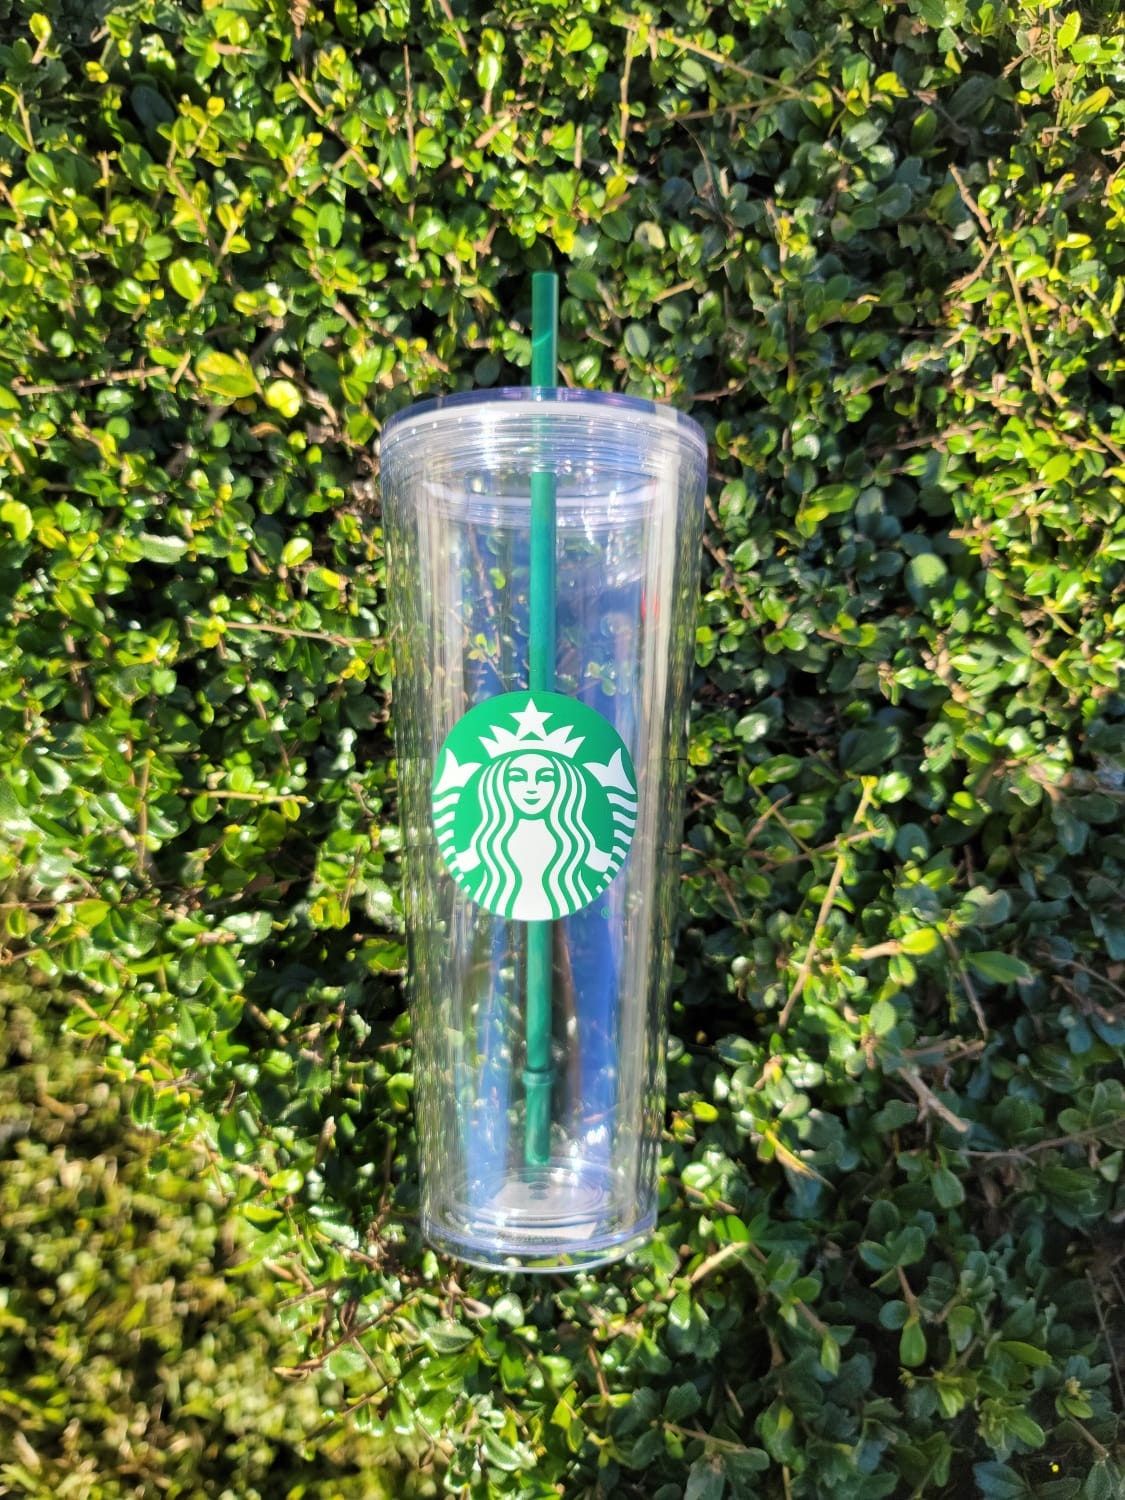 NEW Starbucks Double-walled GLASS Cold Cup Tumbler Mug 20 fl oz